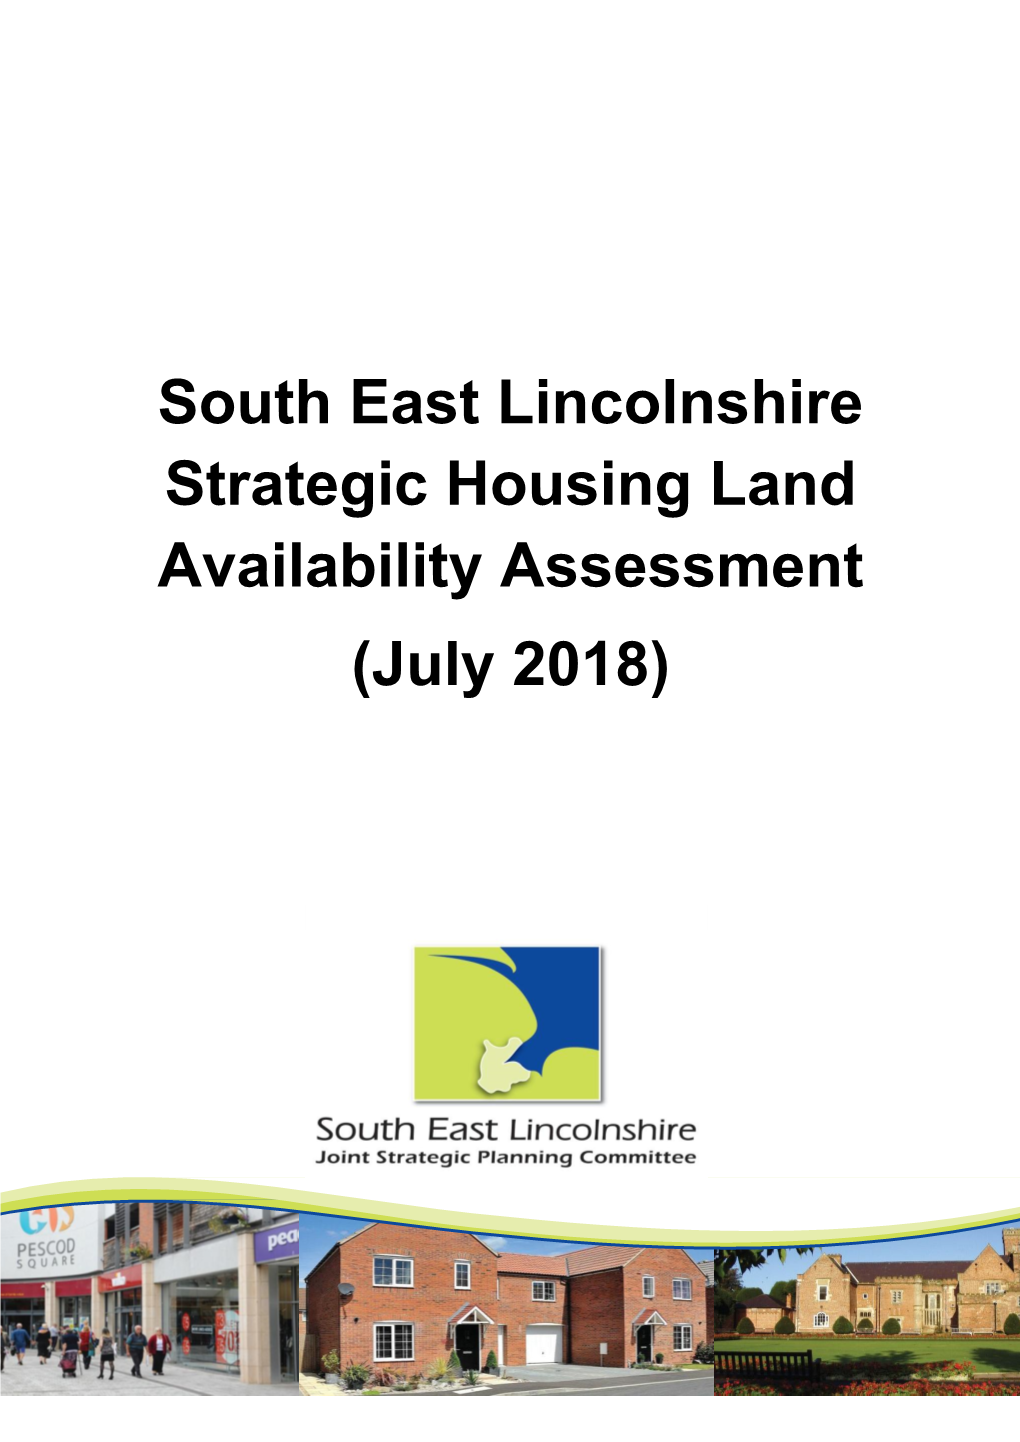 South East Lincolnshire Strategic Housing Land Availability Assessment (July 2018)